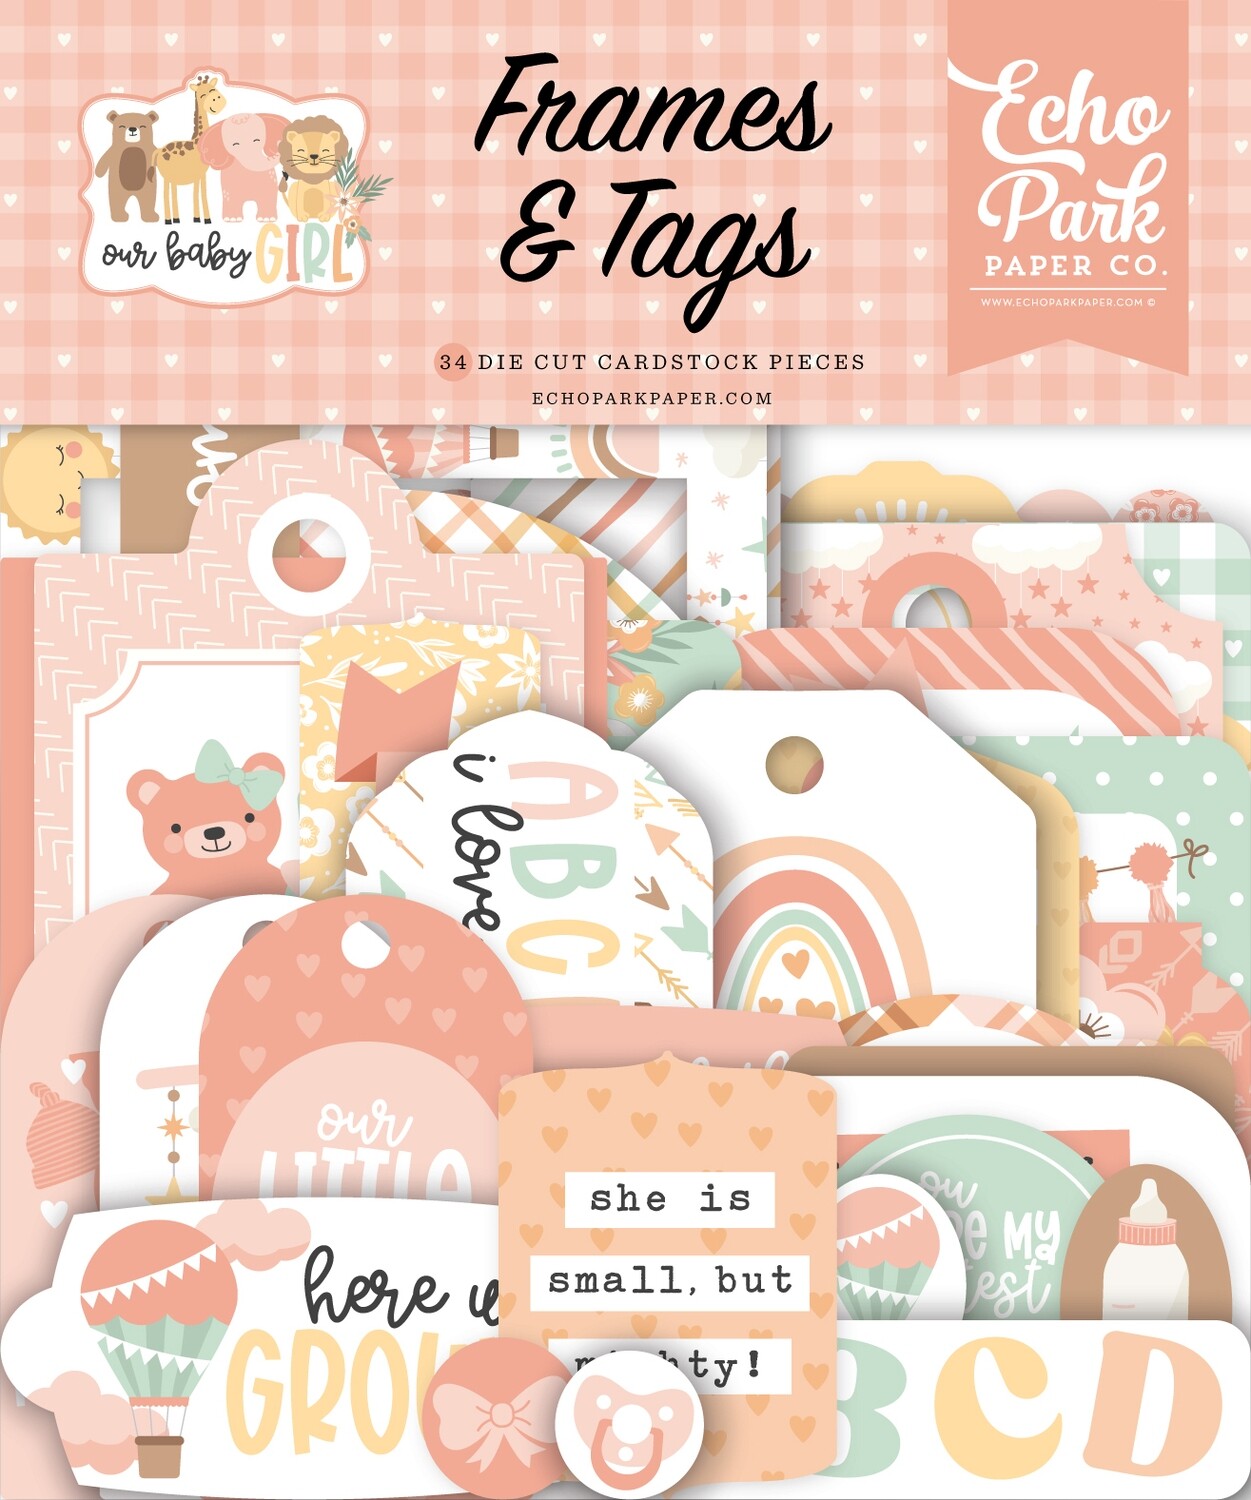 Our Baby Girl Frames & Tags - Echo Park Paper Co.